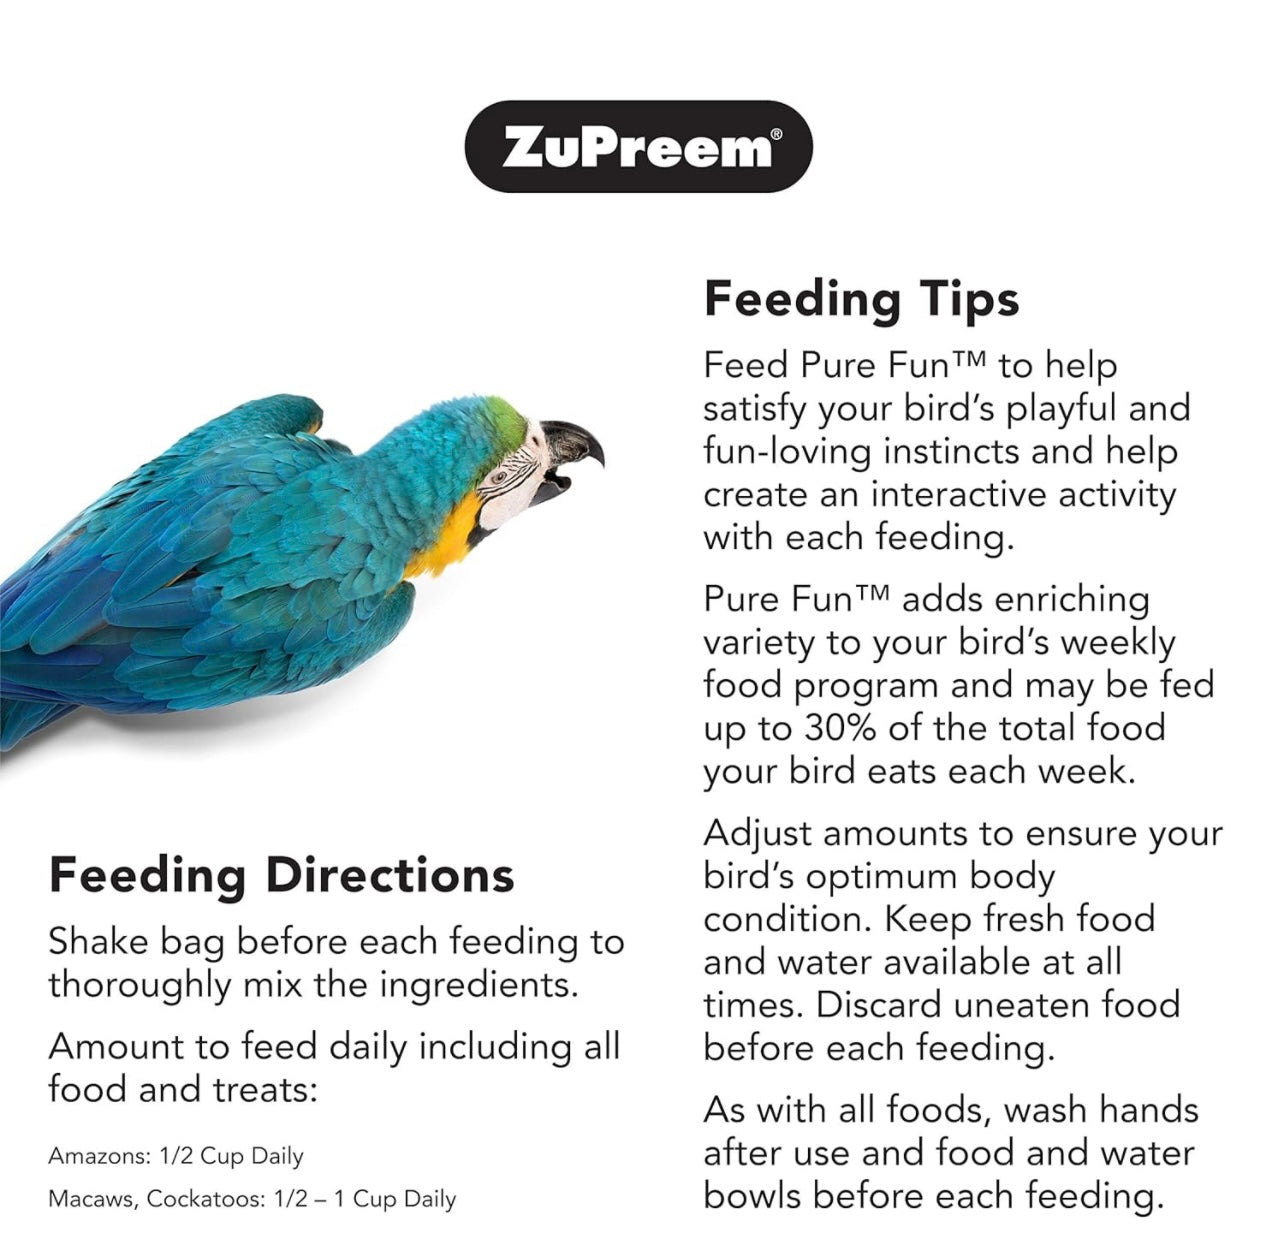 ZuPreem Pure Fun Bird Food for Large Birds, 2 lb - Variety Blend of Fruit, FruitBlend Pellets, Vegetables, Nuts for Amazons, Macaws, Cockatoos